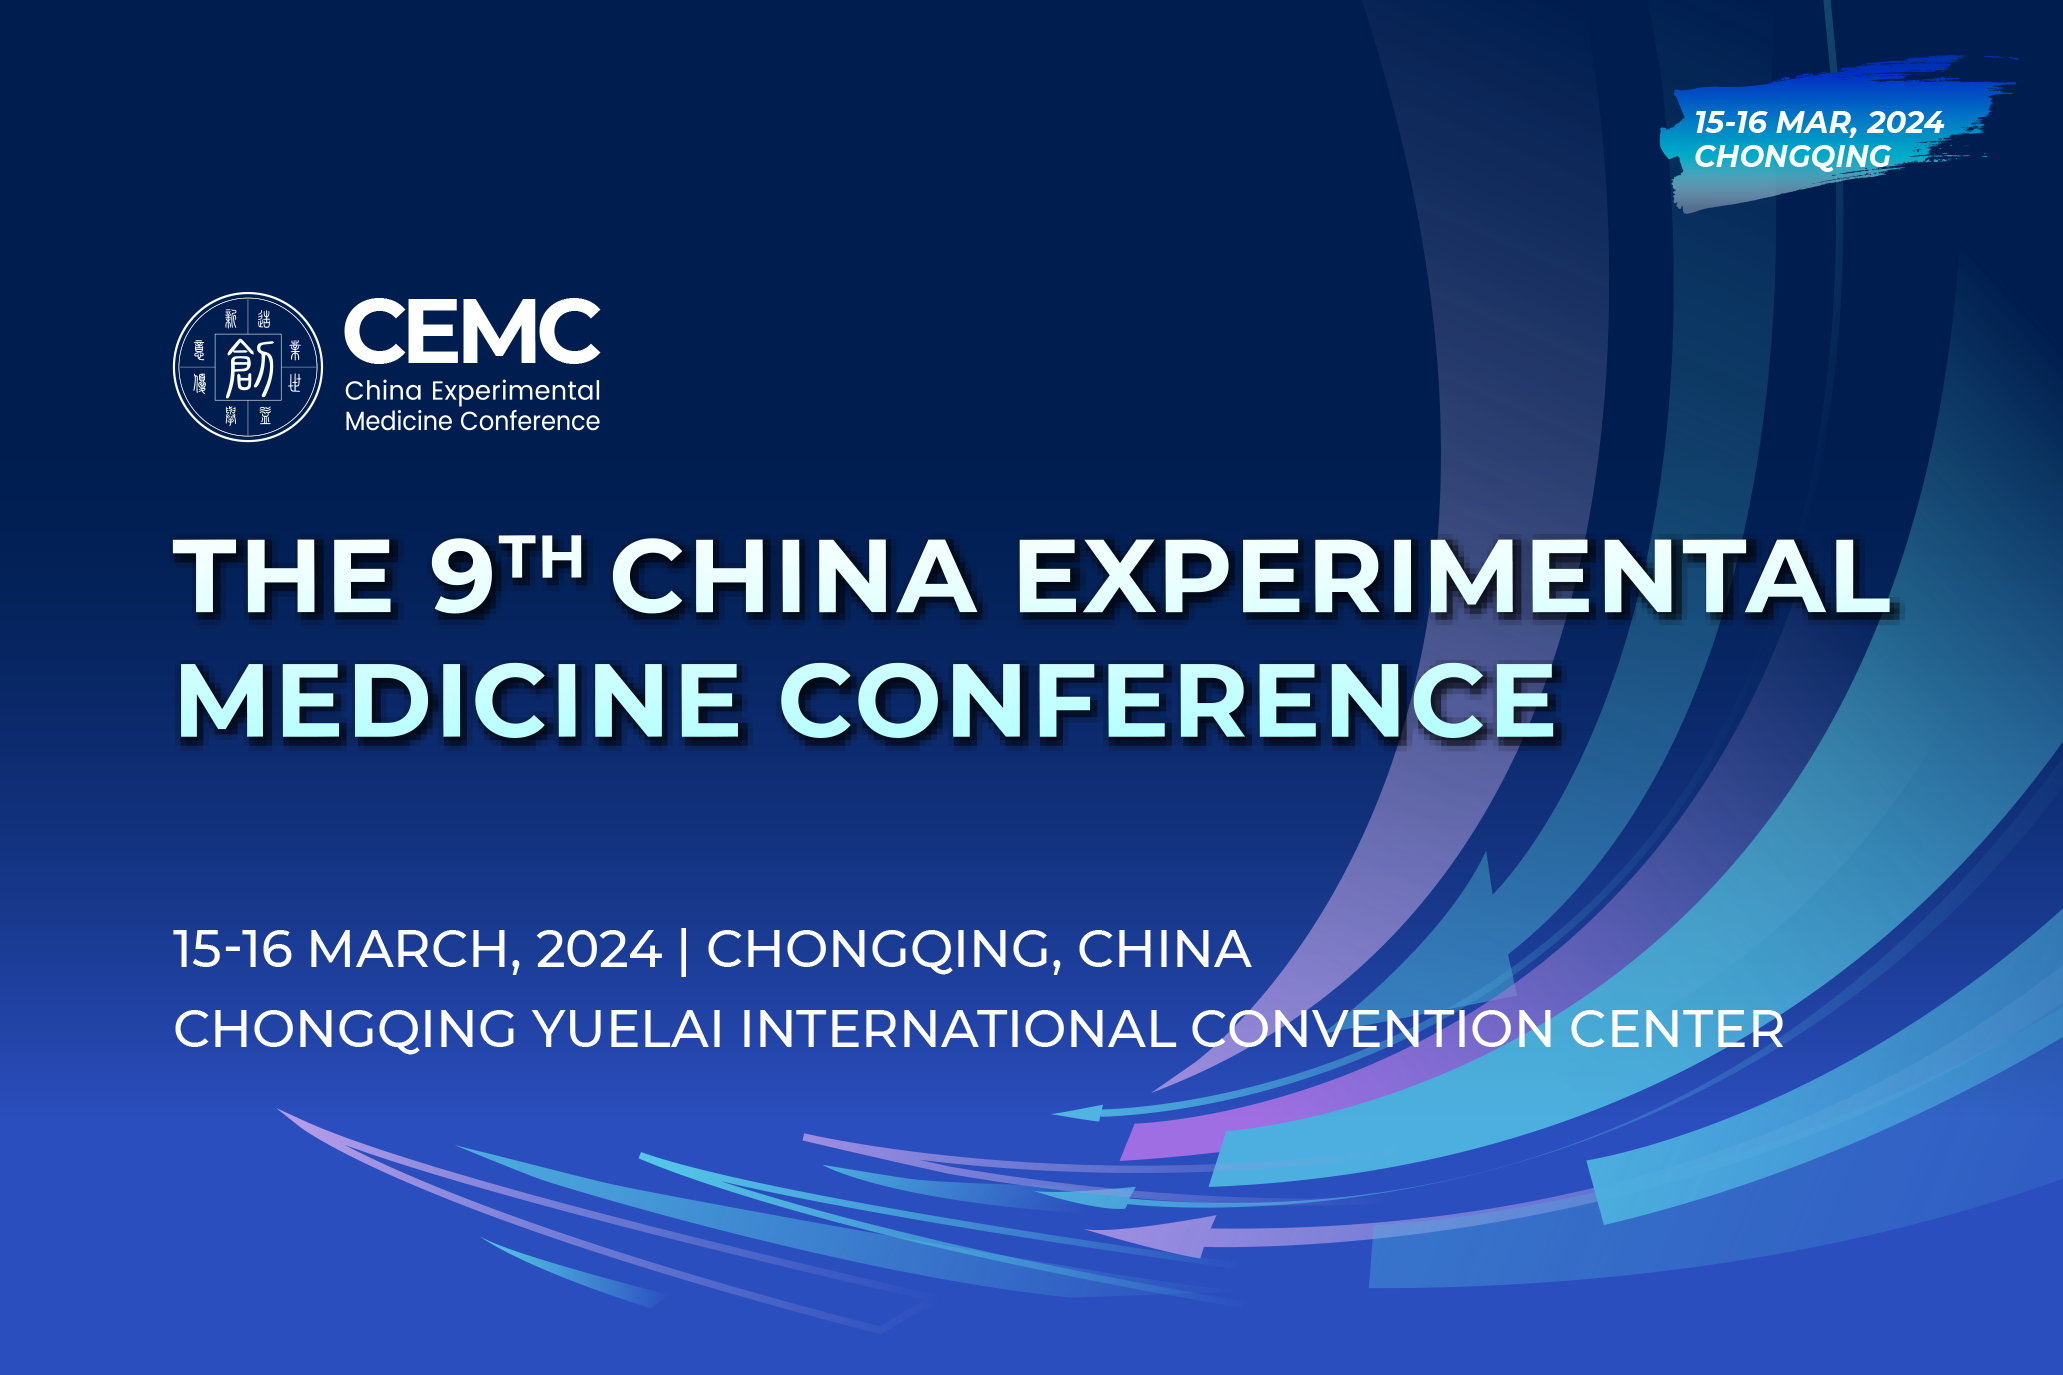 The 9th China Experimental Medicine Conference is scheduled on 15-16 March, 2024